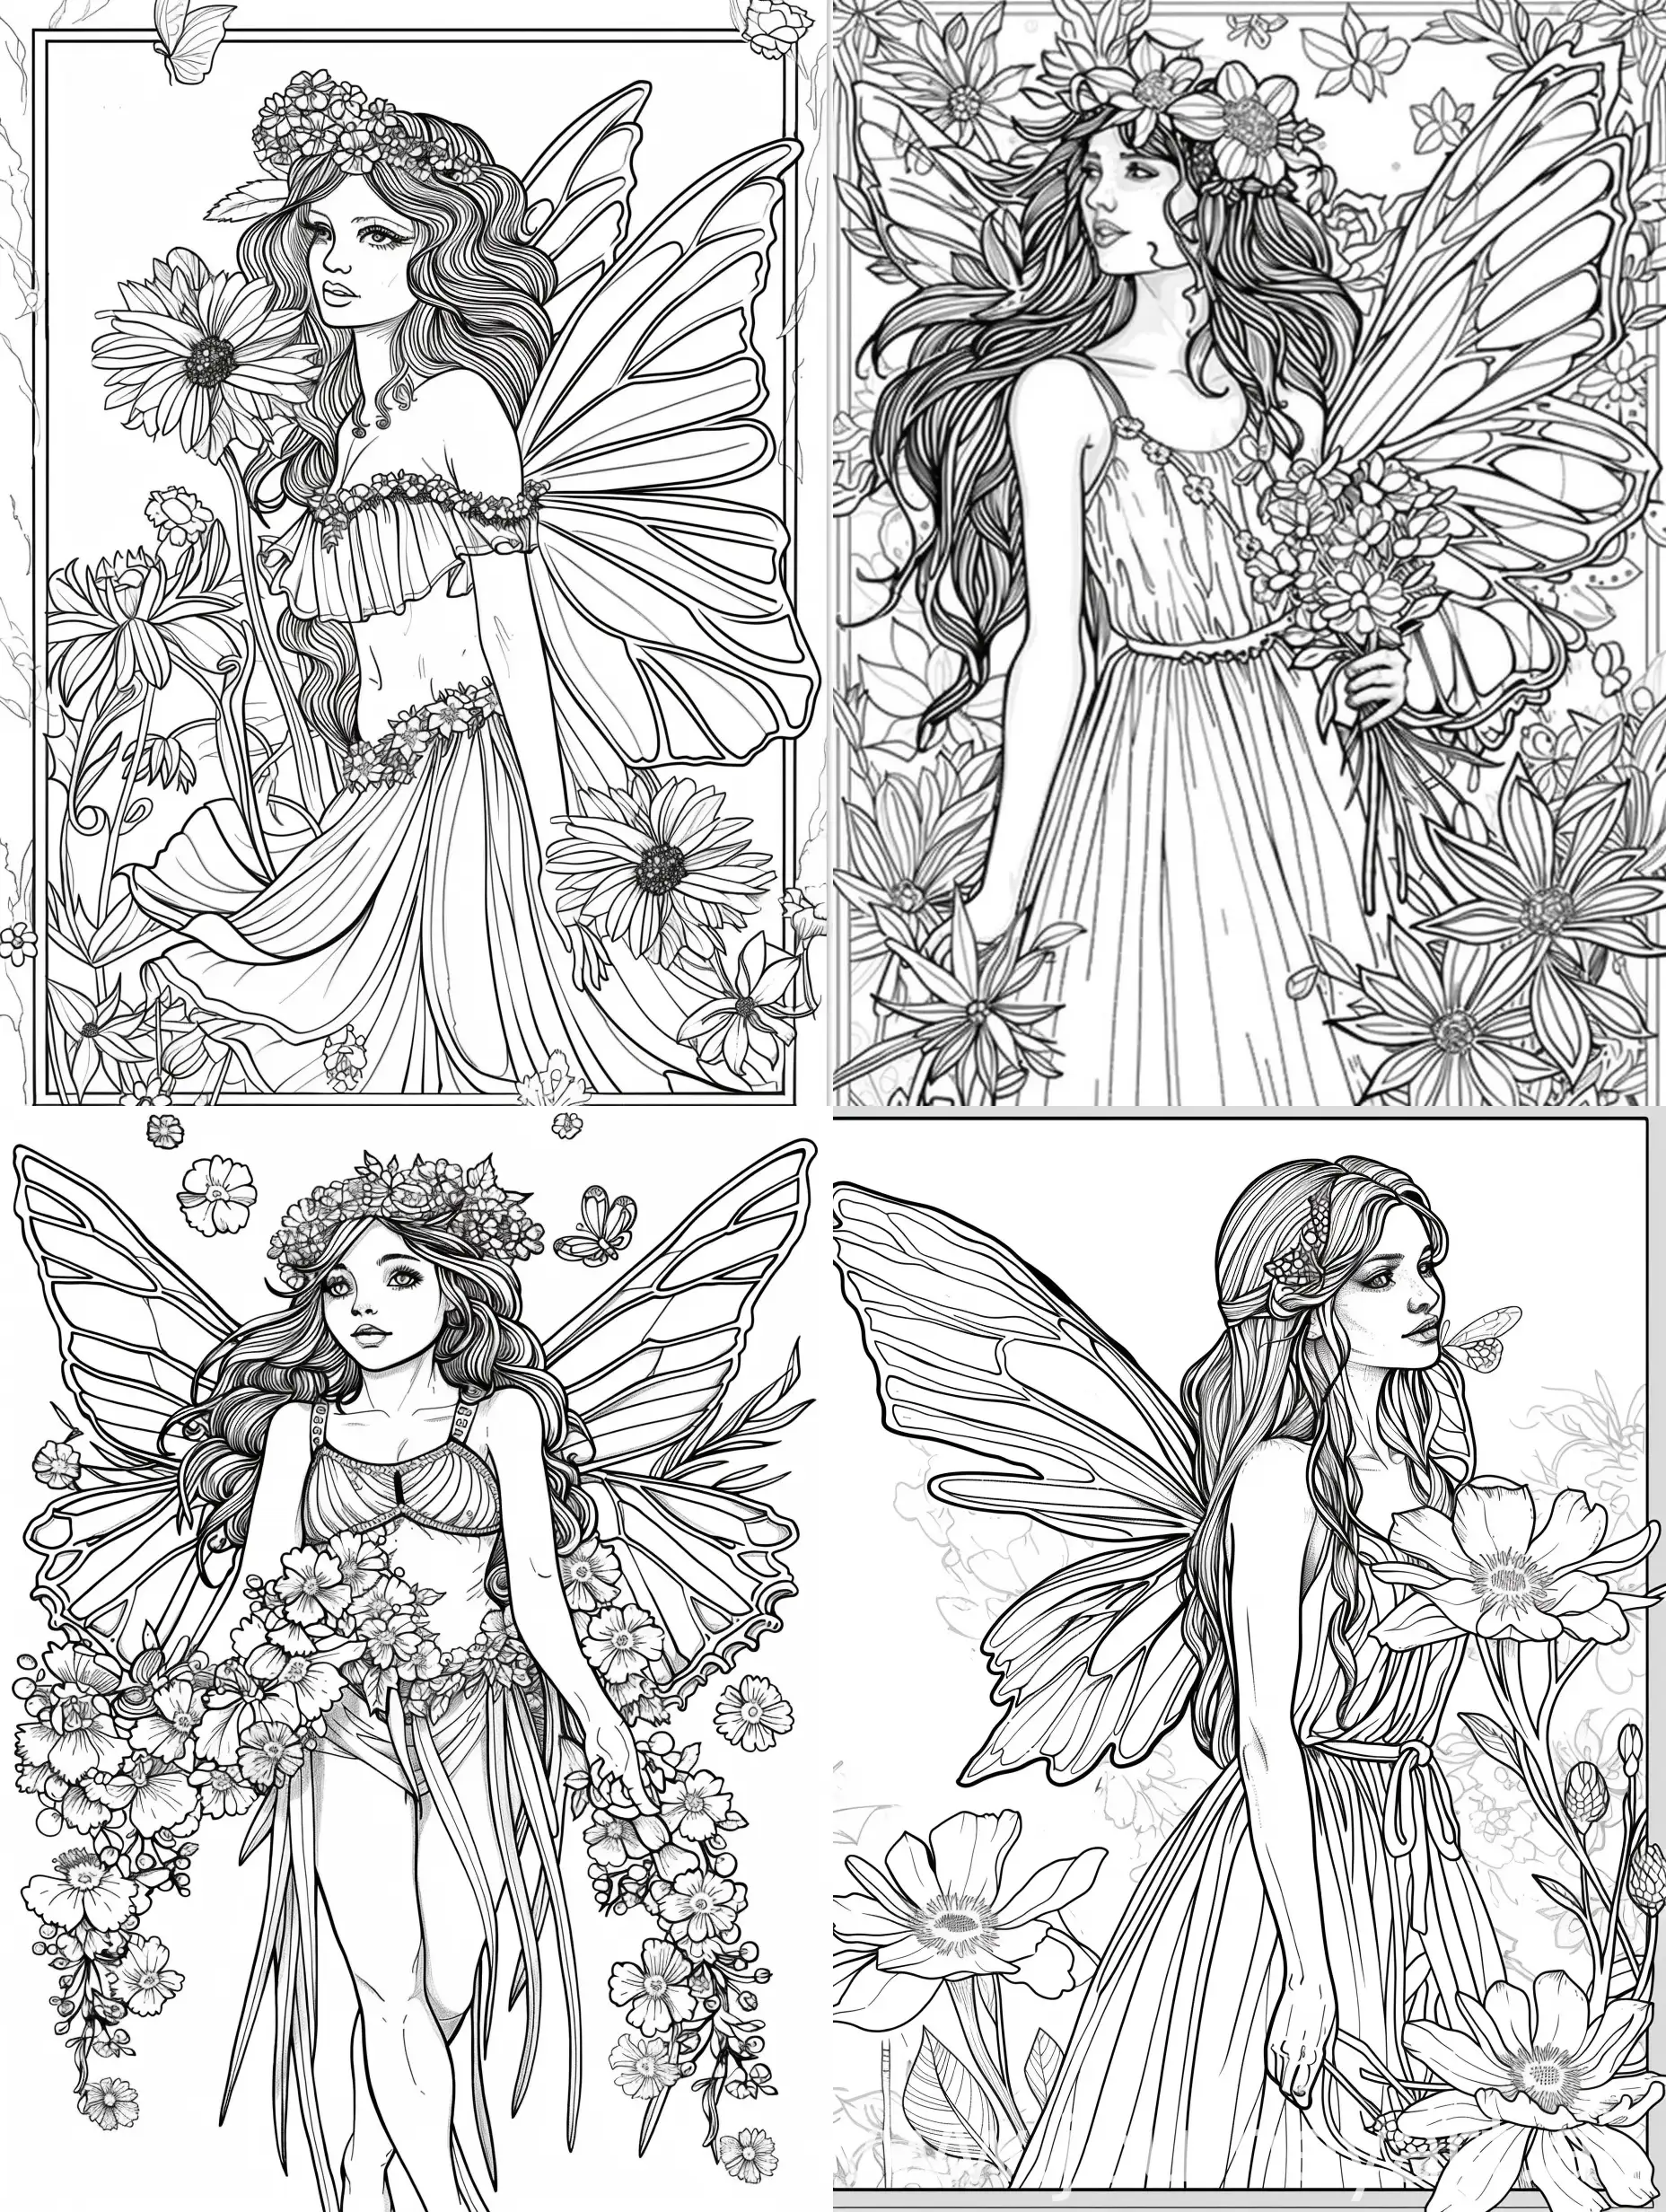 generate on coloring book page of a fairy with flowers
